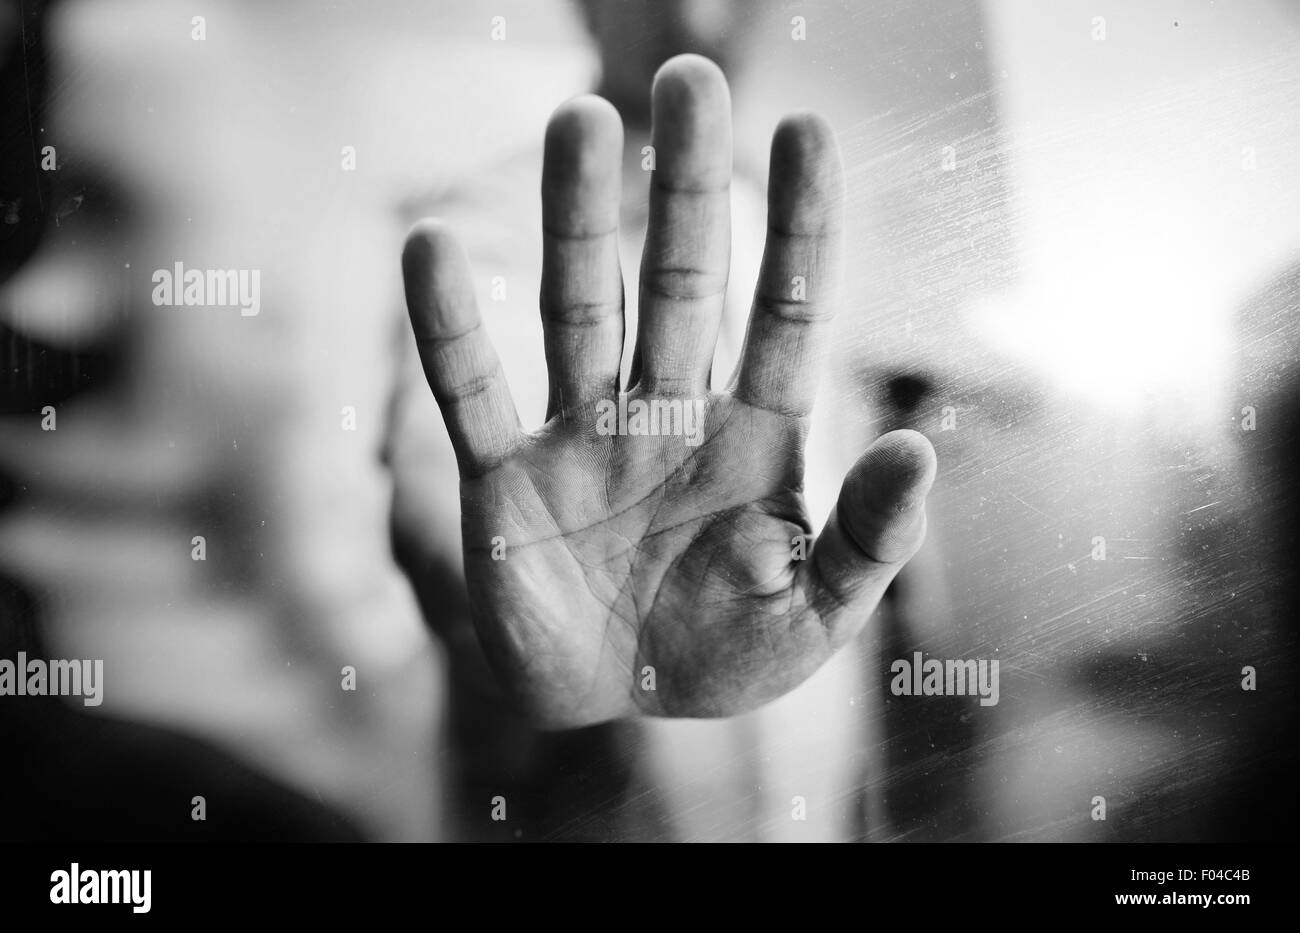 Man showing stop gesture, black and white photo, multiple exposure effect Stock Photo